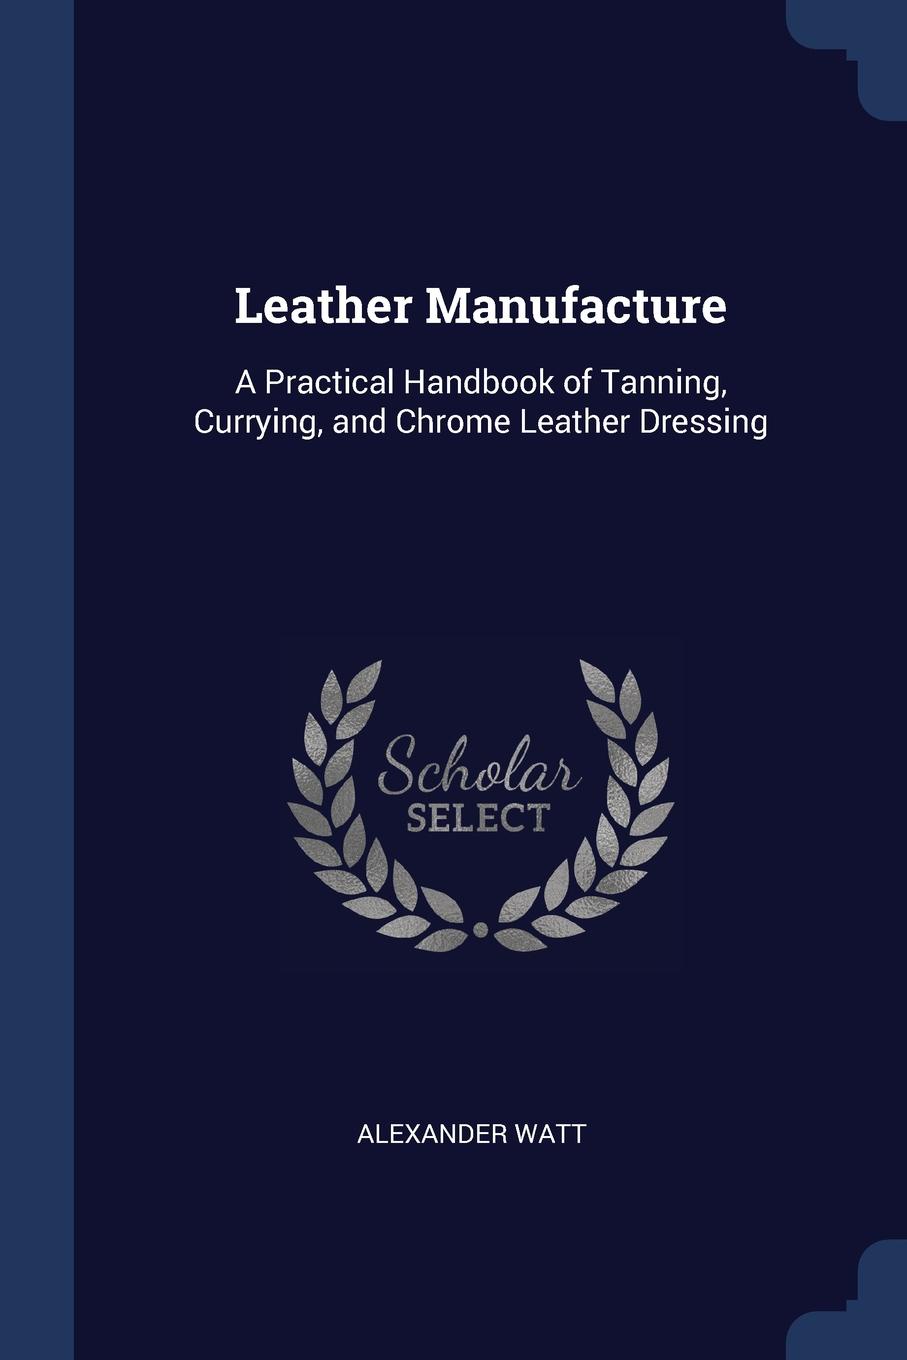 Leather Manufacture. A Practical Handbook of Tanning, Currying, and Chrome Leather Dressing